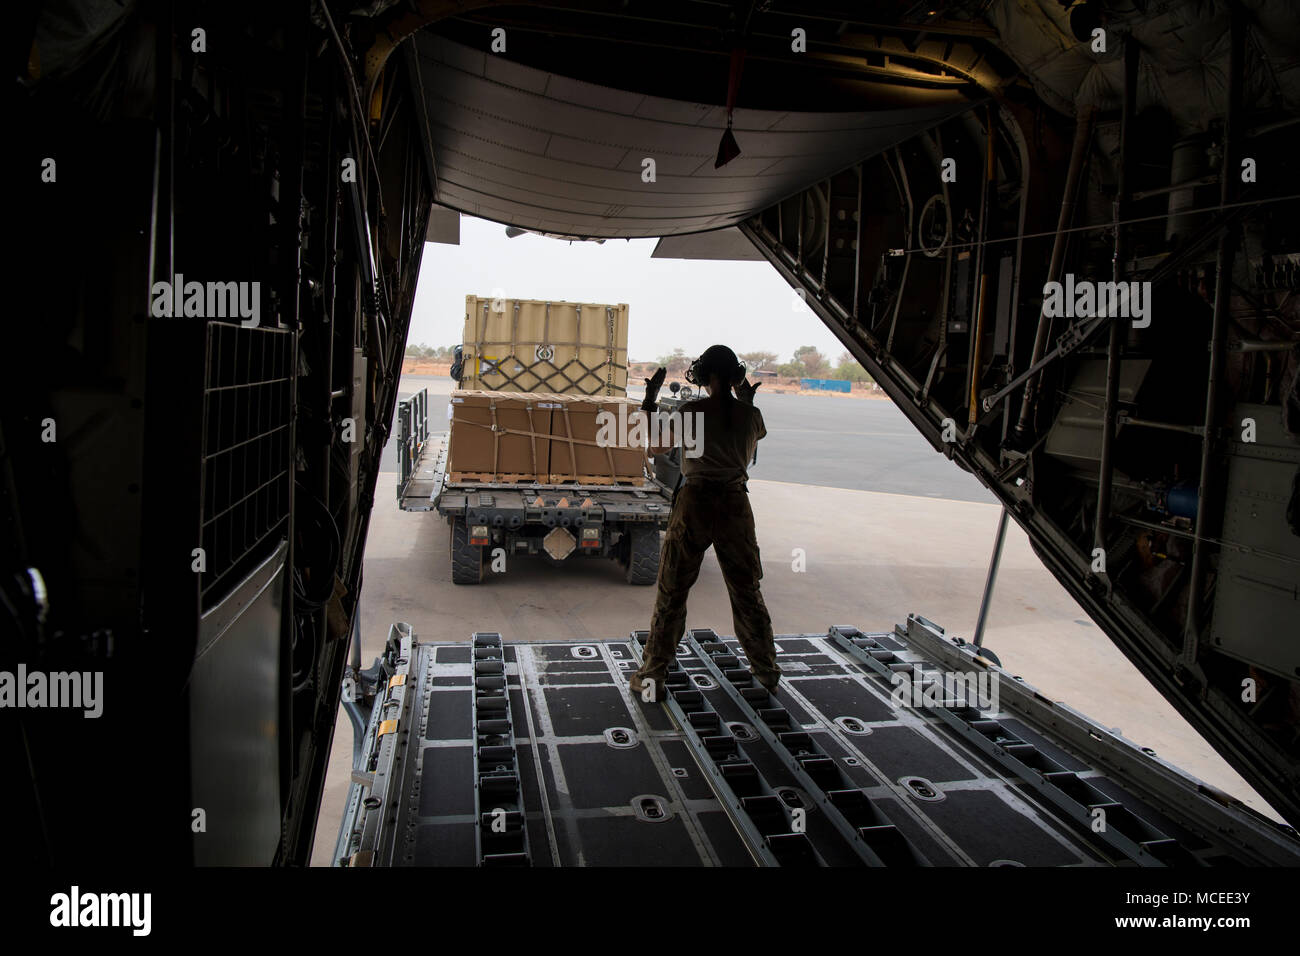 A loadmaster from the West Virginia Air National Guard motions for cargo inside a C-130H Hercules April 10, 2018 at Diori Hamani International Airport, Niger. Approximately 1,900 service members from more than 20 African and western partner nations are participating in Flintlock 2018 at multiple locations in Niger, Burkina Faso, and Senegal. Flintlock is an annual, African-led, integrated military and law enforcement exercise that has strengthened key partner nation forces throughout North and West Africa as well as western Special Operations Forces since 2005.  (U.S. Air Force photo/Senior Ai Stock Photo